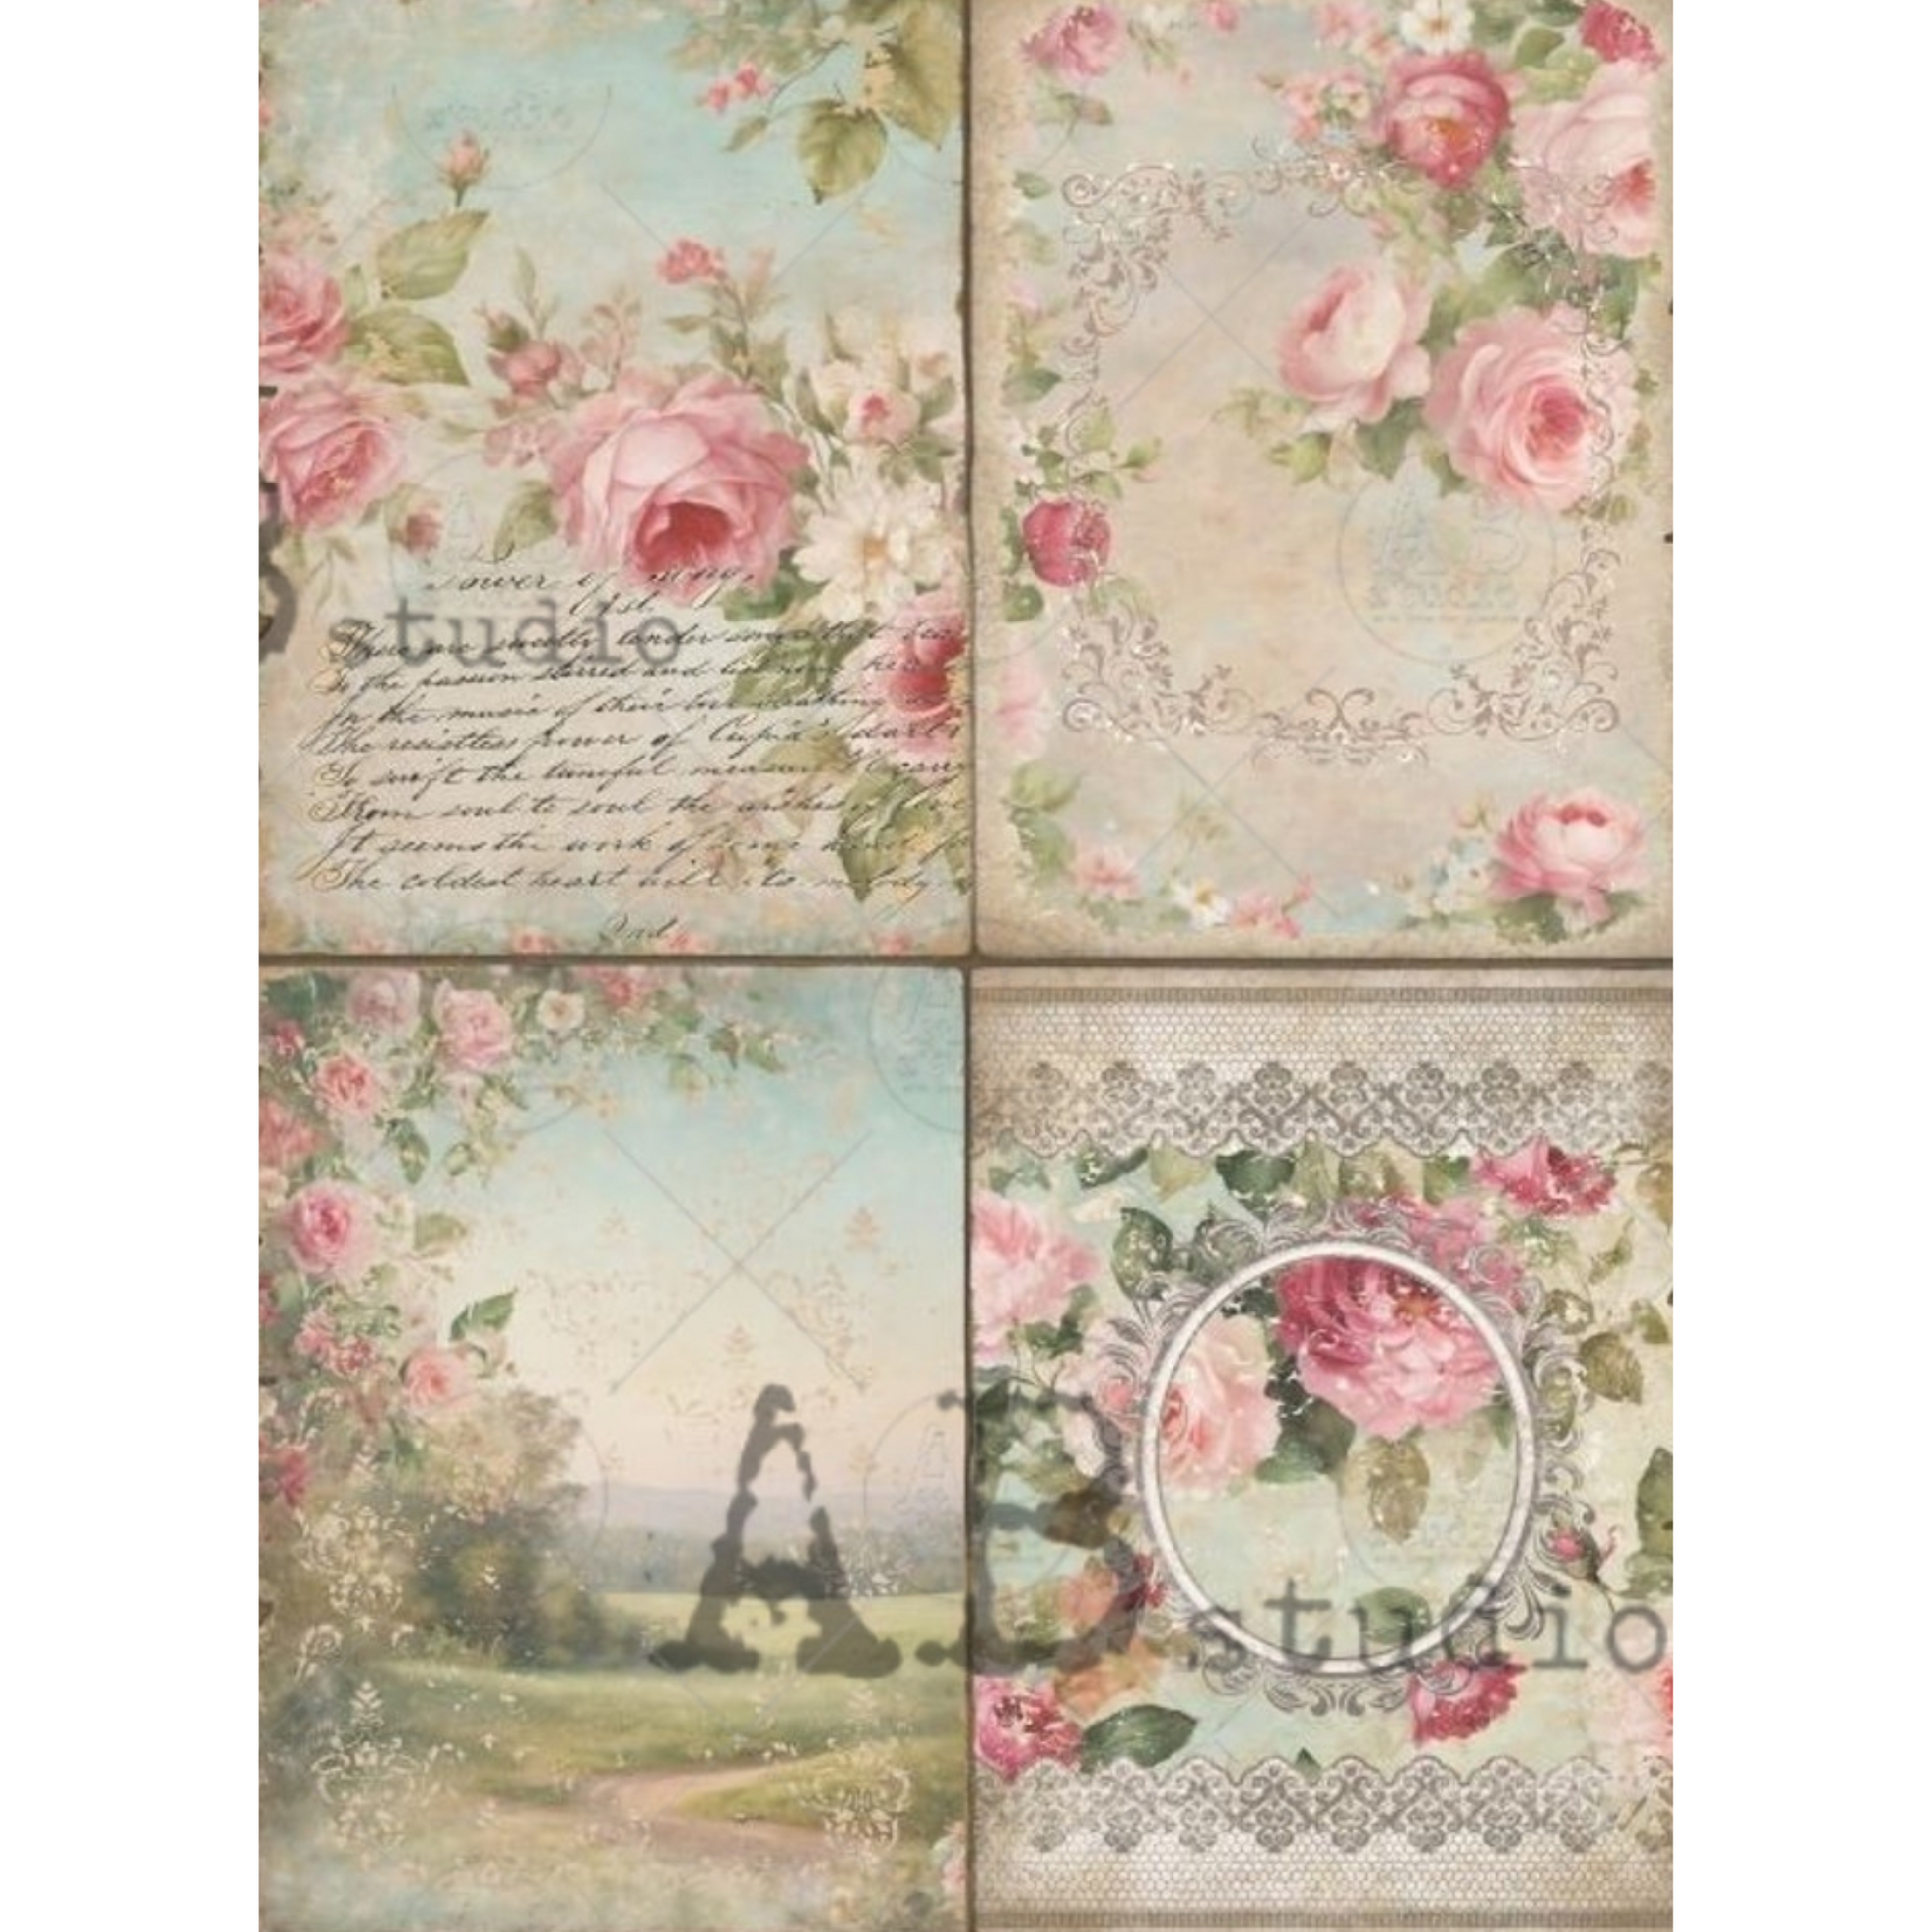 4 Shabby Chic Easter Spring Roses Scenes" decoupage rice paper by AB Studio. Available at Milton's Daughter.